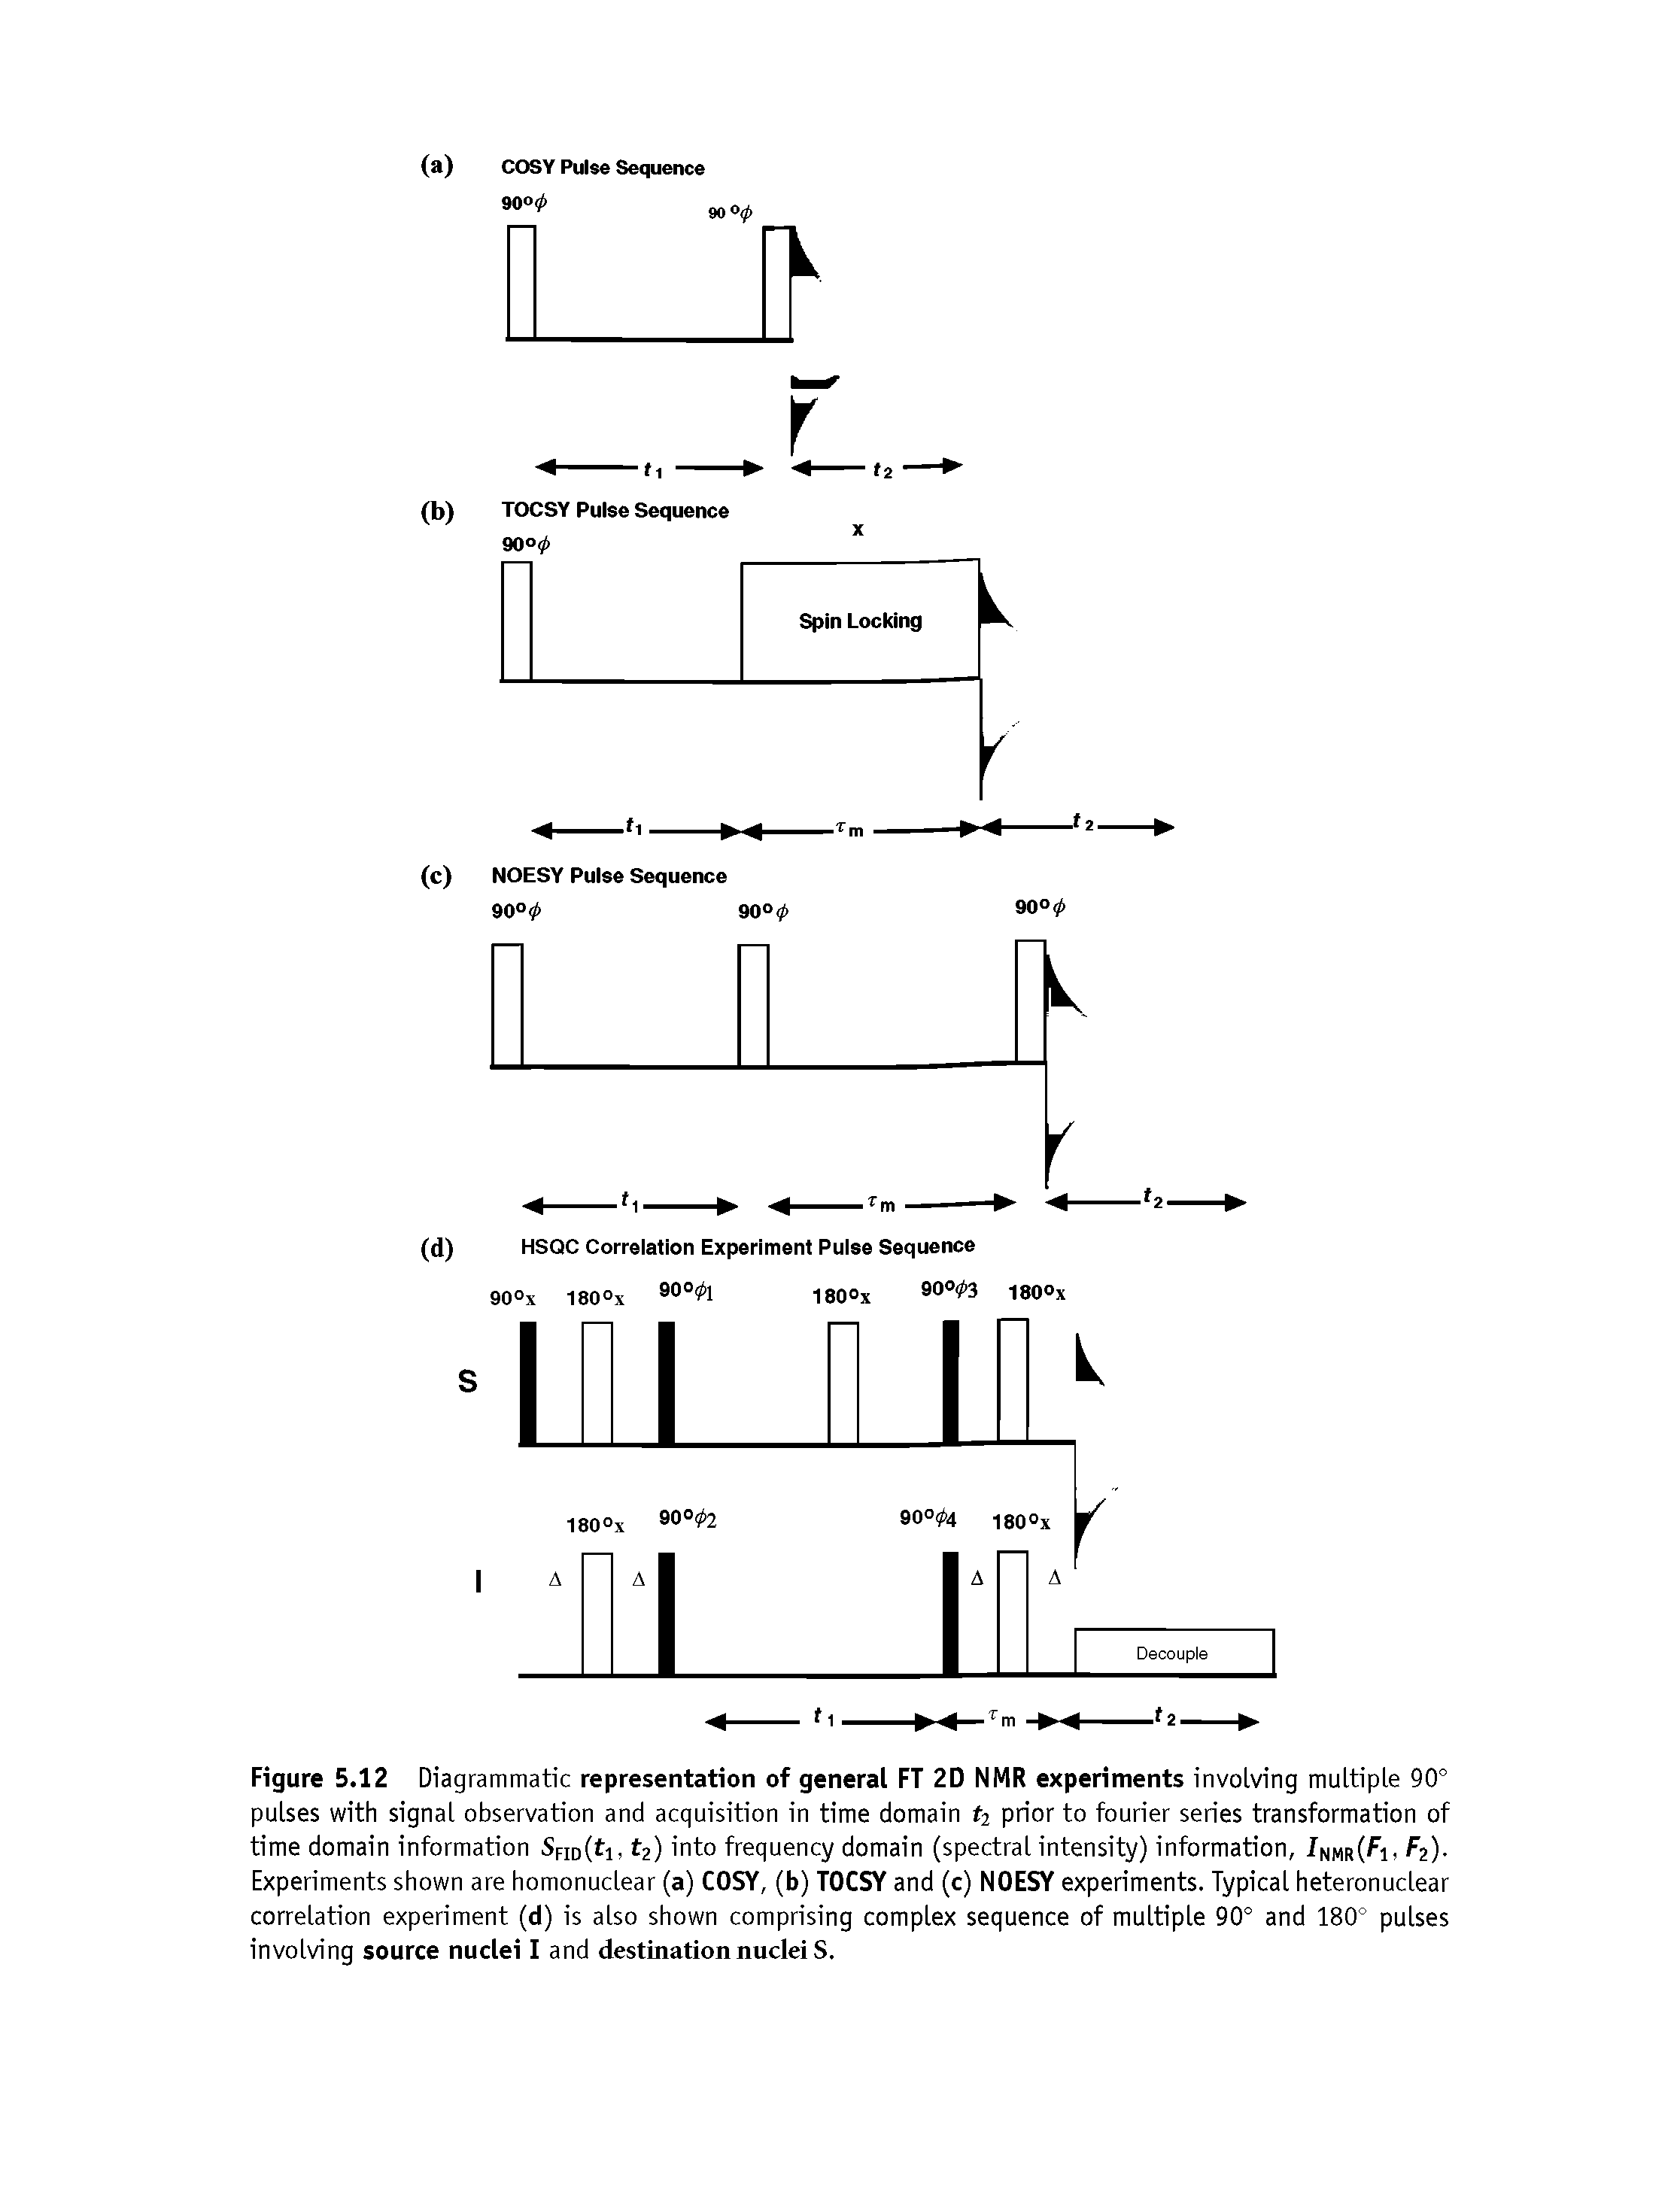 Figure 5.12 Diagrammatic representation of general FT 2D NMR experiments involving multiple 90° pulses with signal observation and acquisition in time domain <2 prior to fourier series transformation of time domain information SpiDCti, t2) into frequency domain (spectral intensity) information, 2)-...